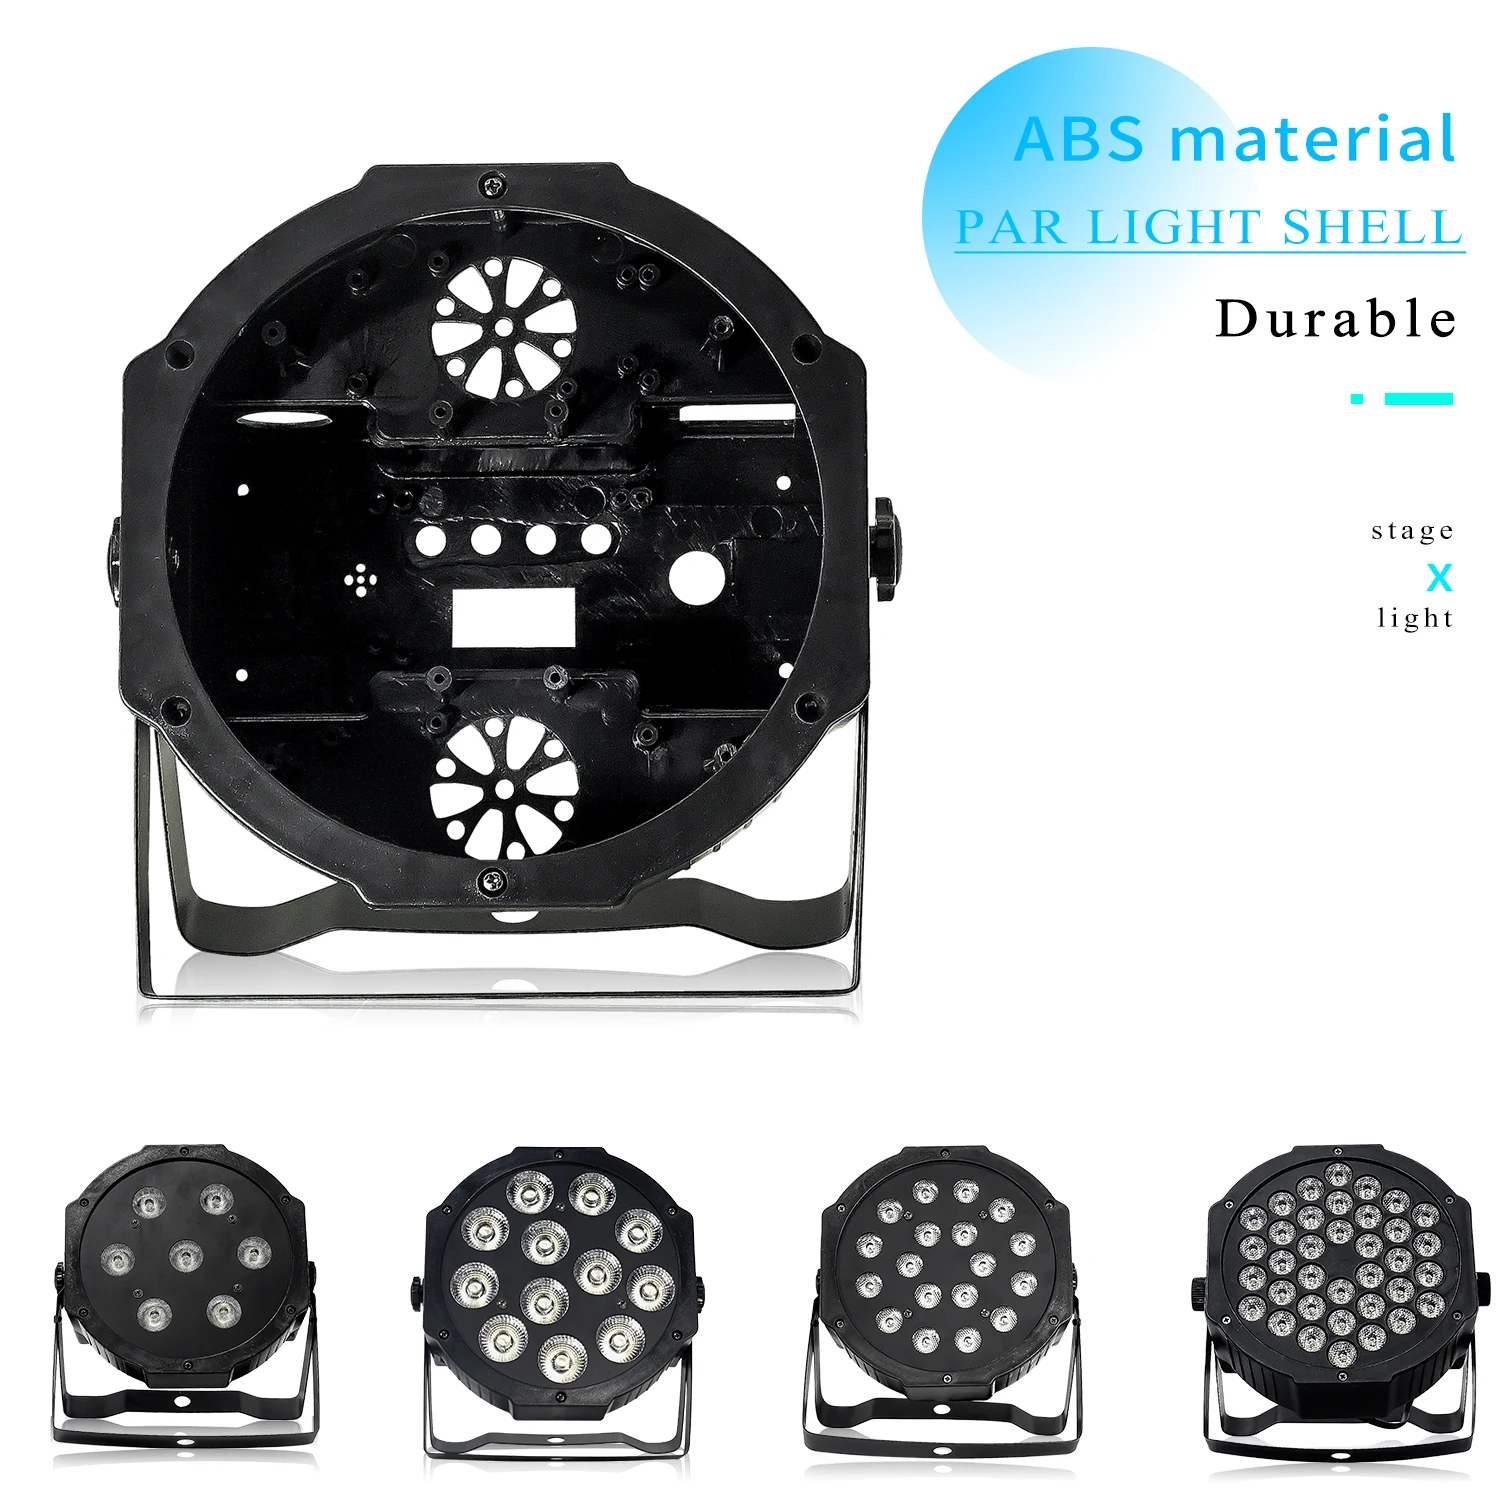 The Led Par Lights Shell for 7x12w 7x10w 18x3w 12x12w 36x3w flat par led with ABS Materials Repair accessories